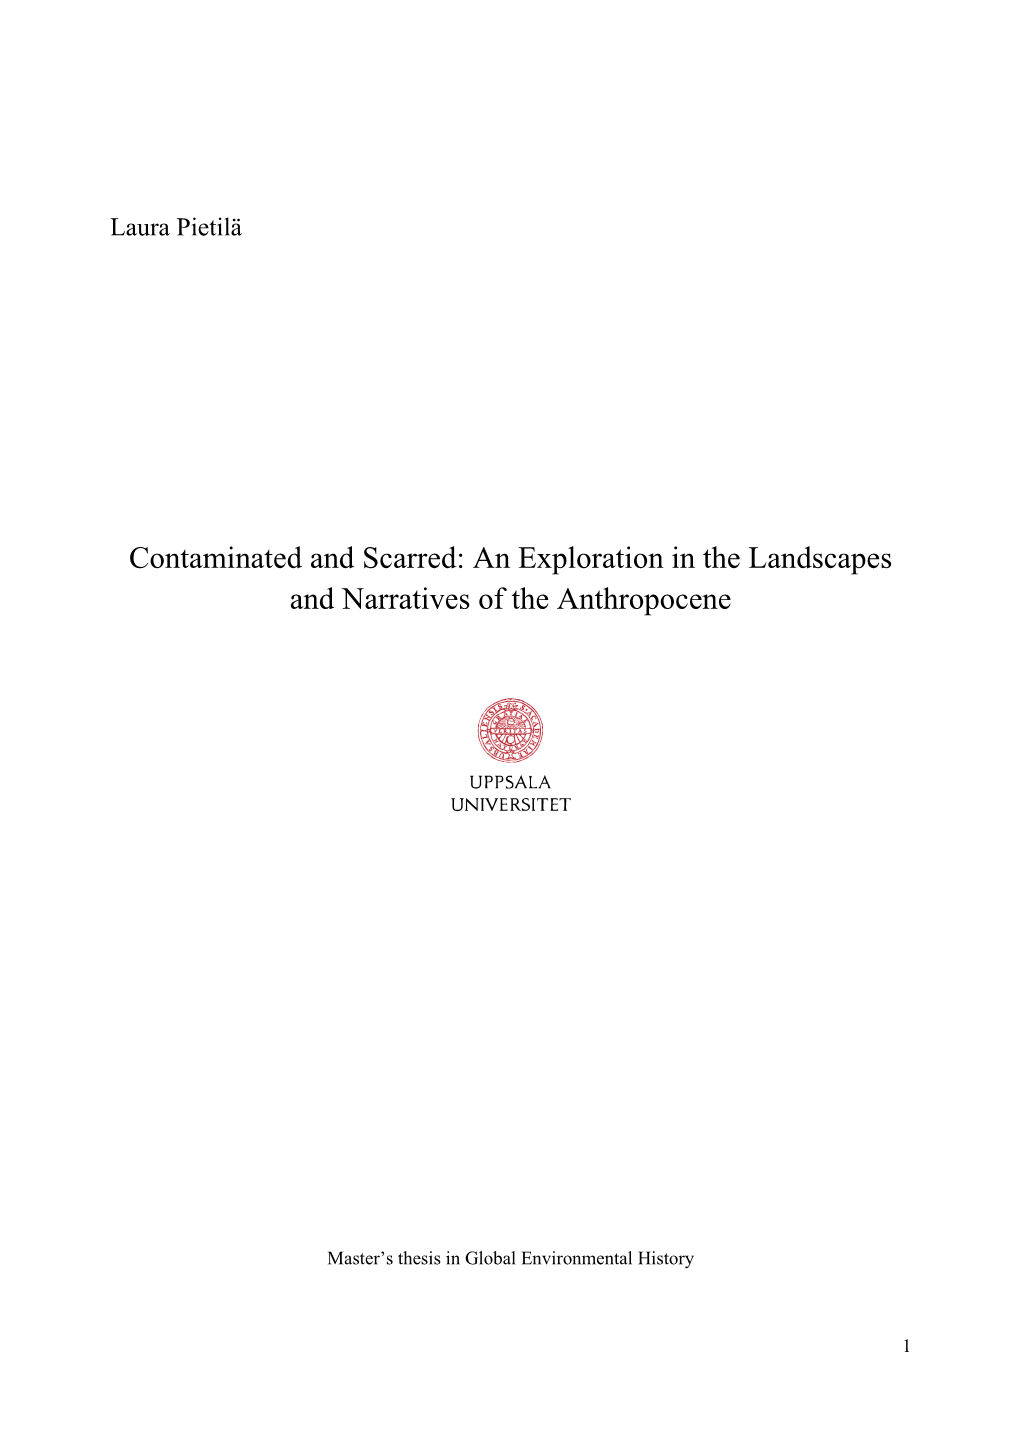 An Exploration in the Landscapes and Narratives of the Anthropocene